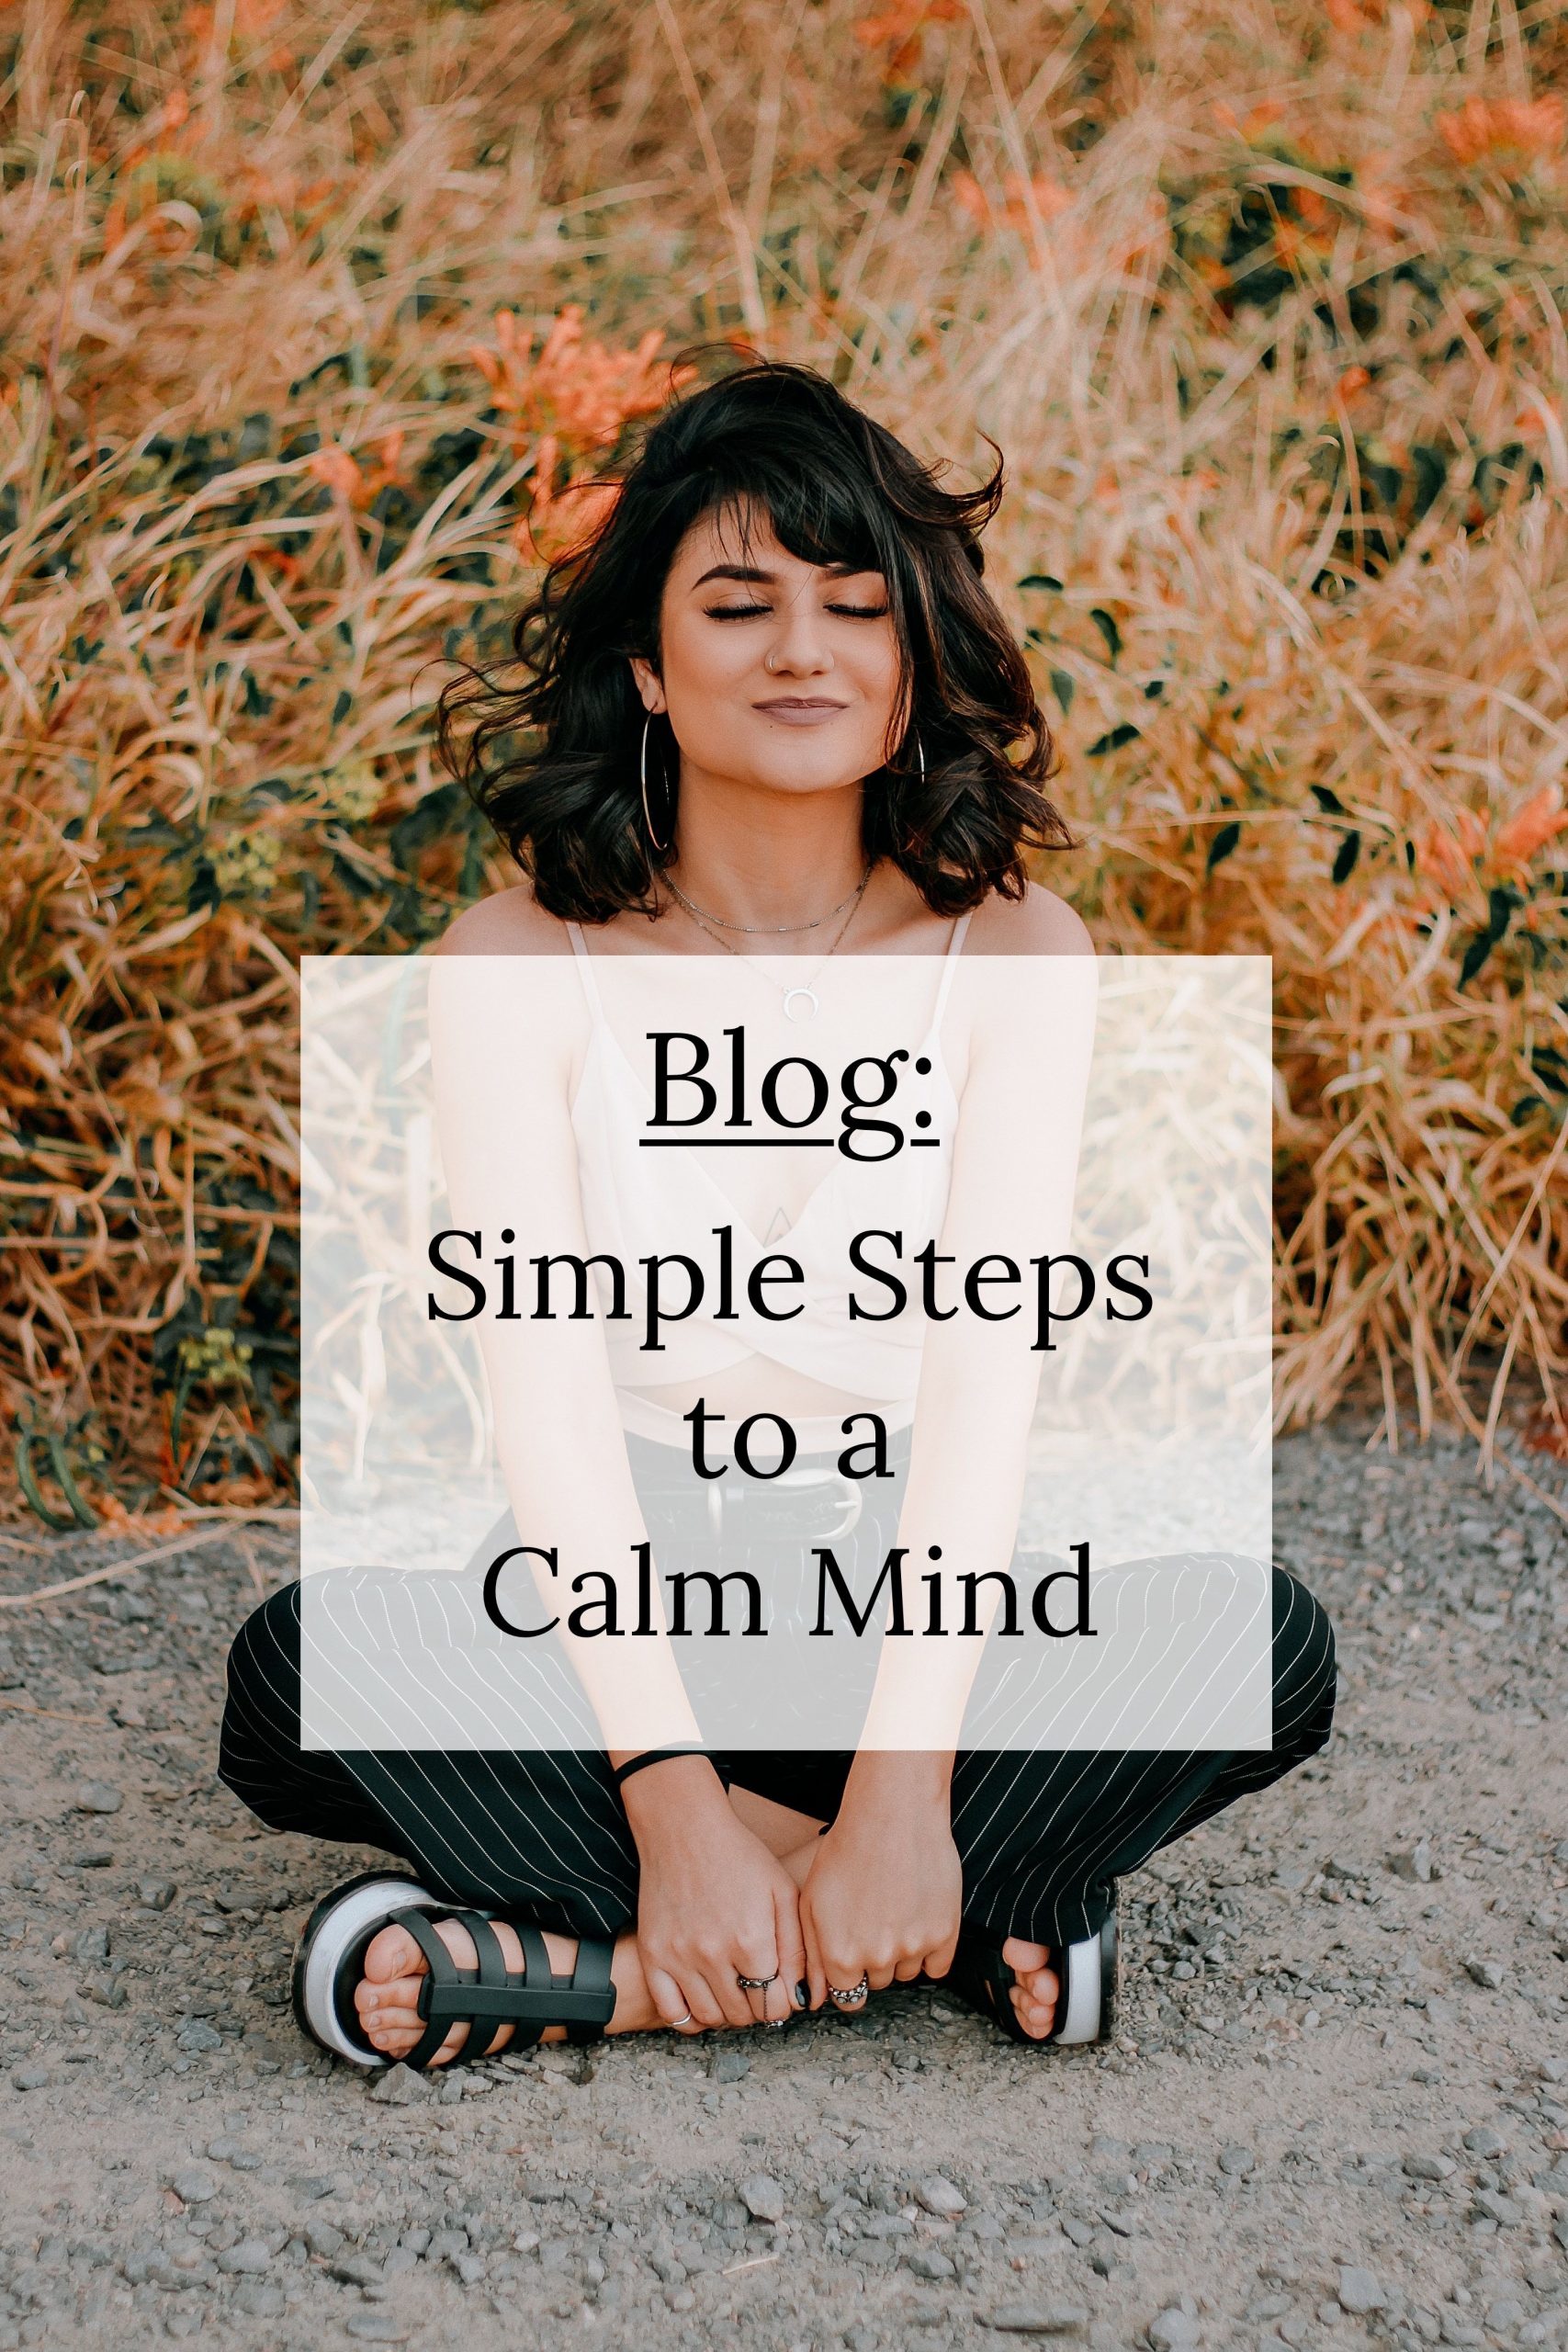 Simple Steps to a Calm Mind